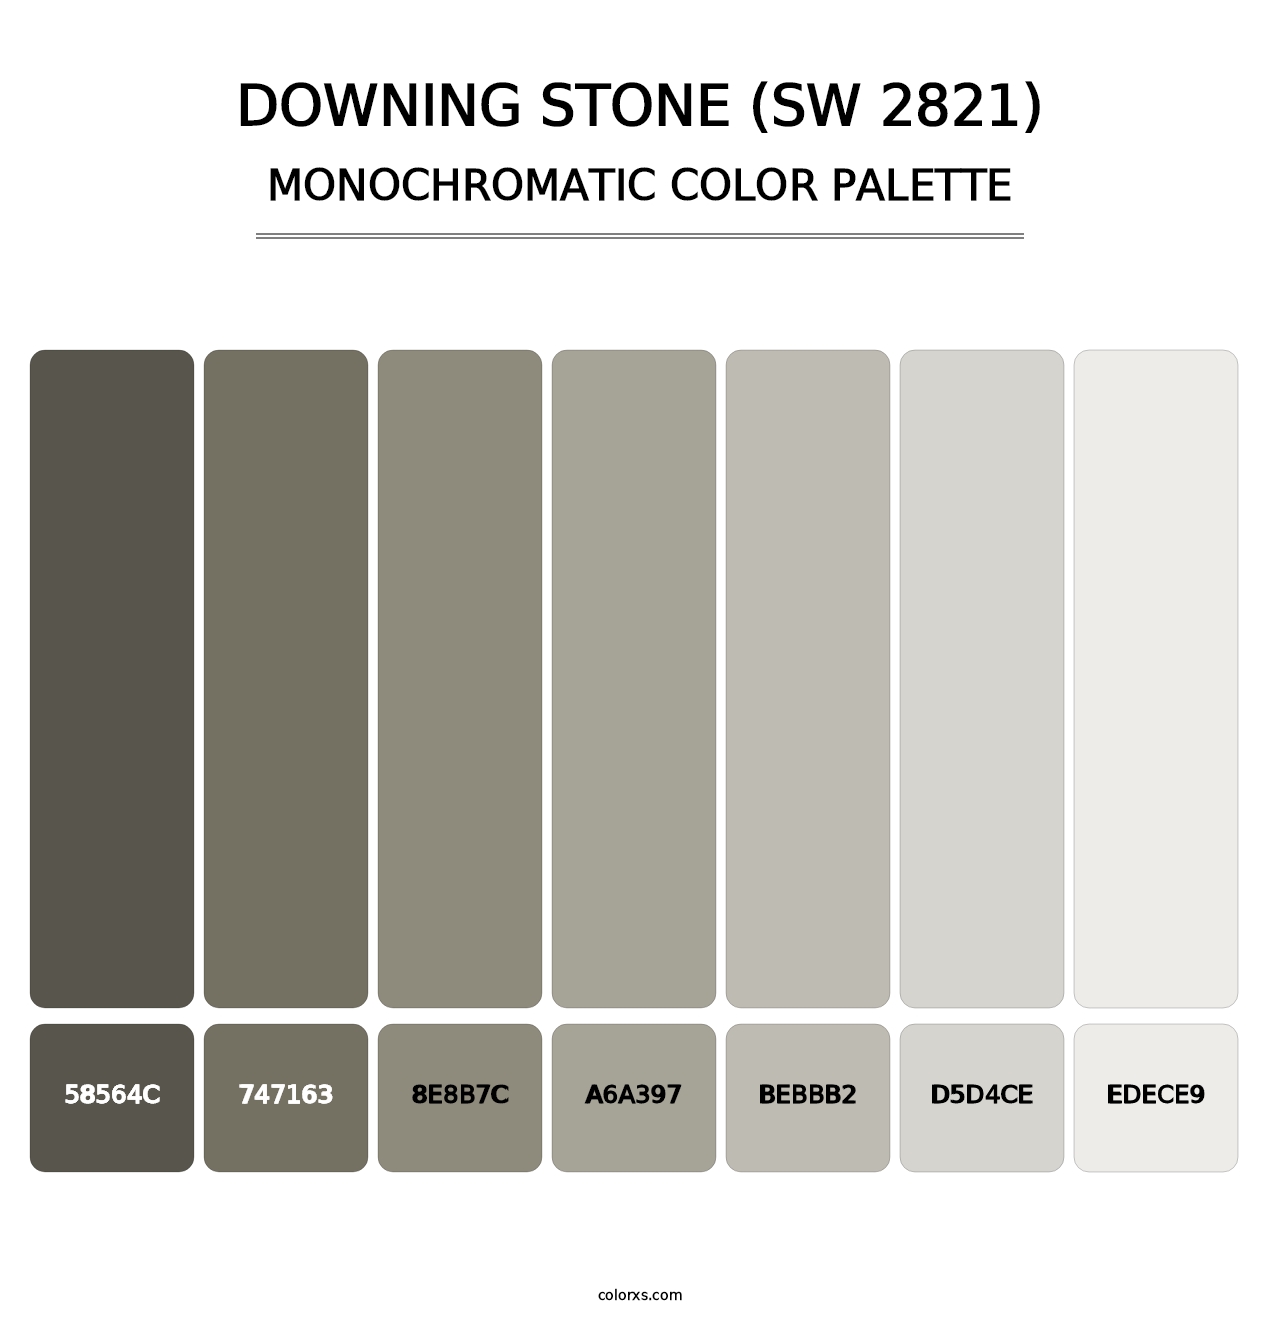 Downing Stone (SW 2821) - Monochromatic Color Palette